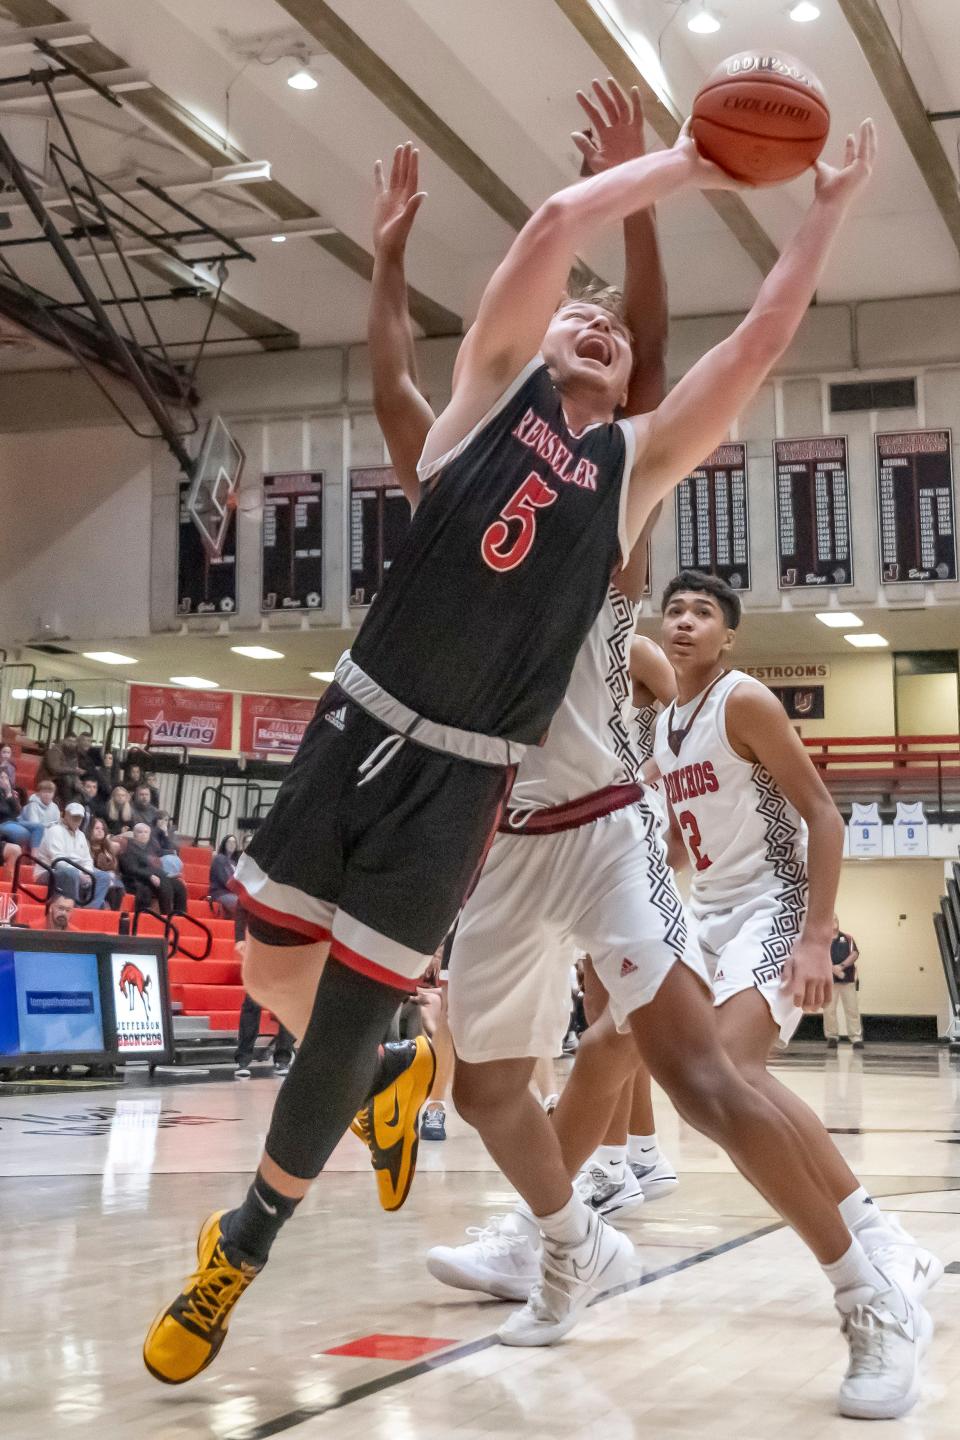 Rensselaer senior Kadyn Rowland (5) drives to the basket during the IU Health Hoops Classic basketball 3rd place game, Lafayette Jefferson vs Rensselaer Central, Saturday, Dec. 2, 2023, at Crawley Center in Lafayette, Ind. Lafayette Jefferson won 66-28.